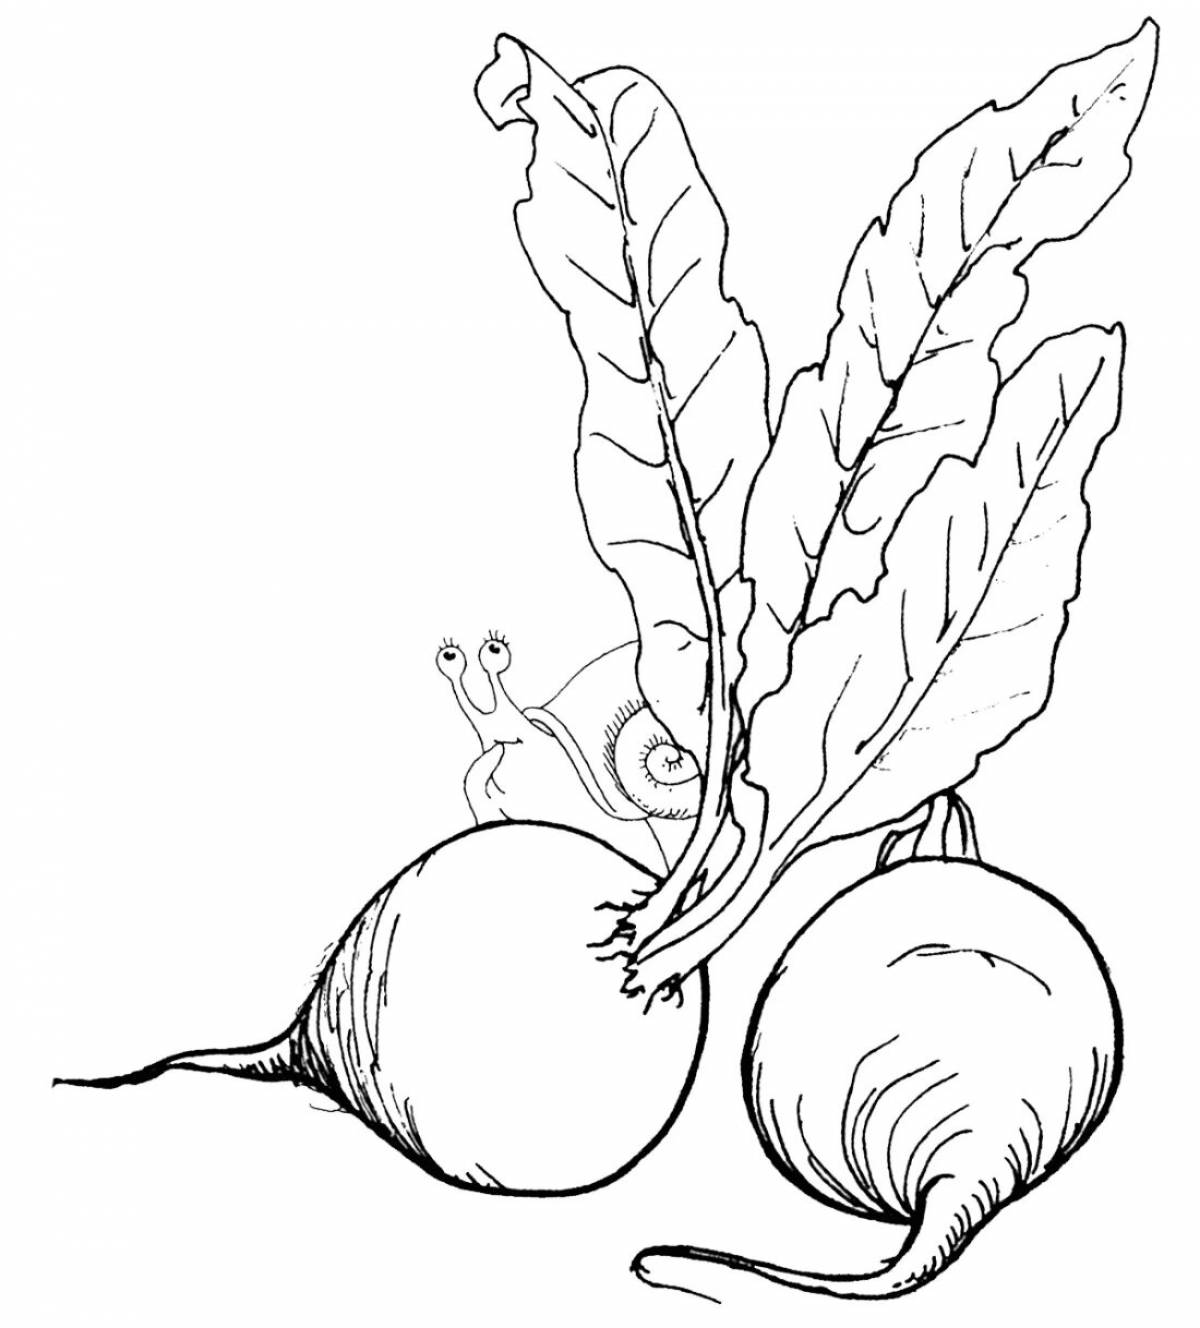 Awesome radish coloring page